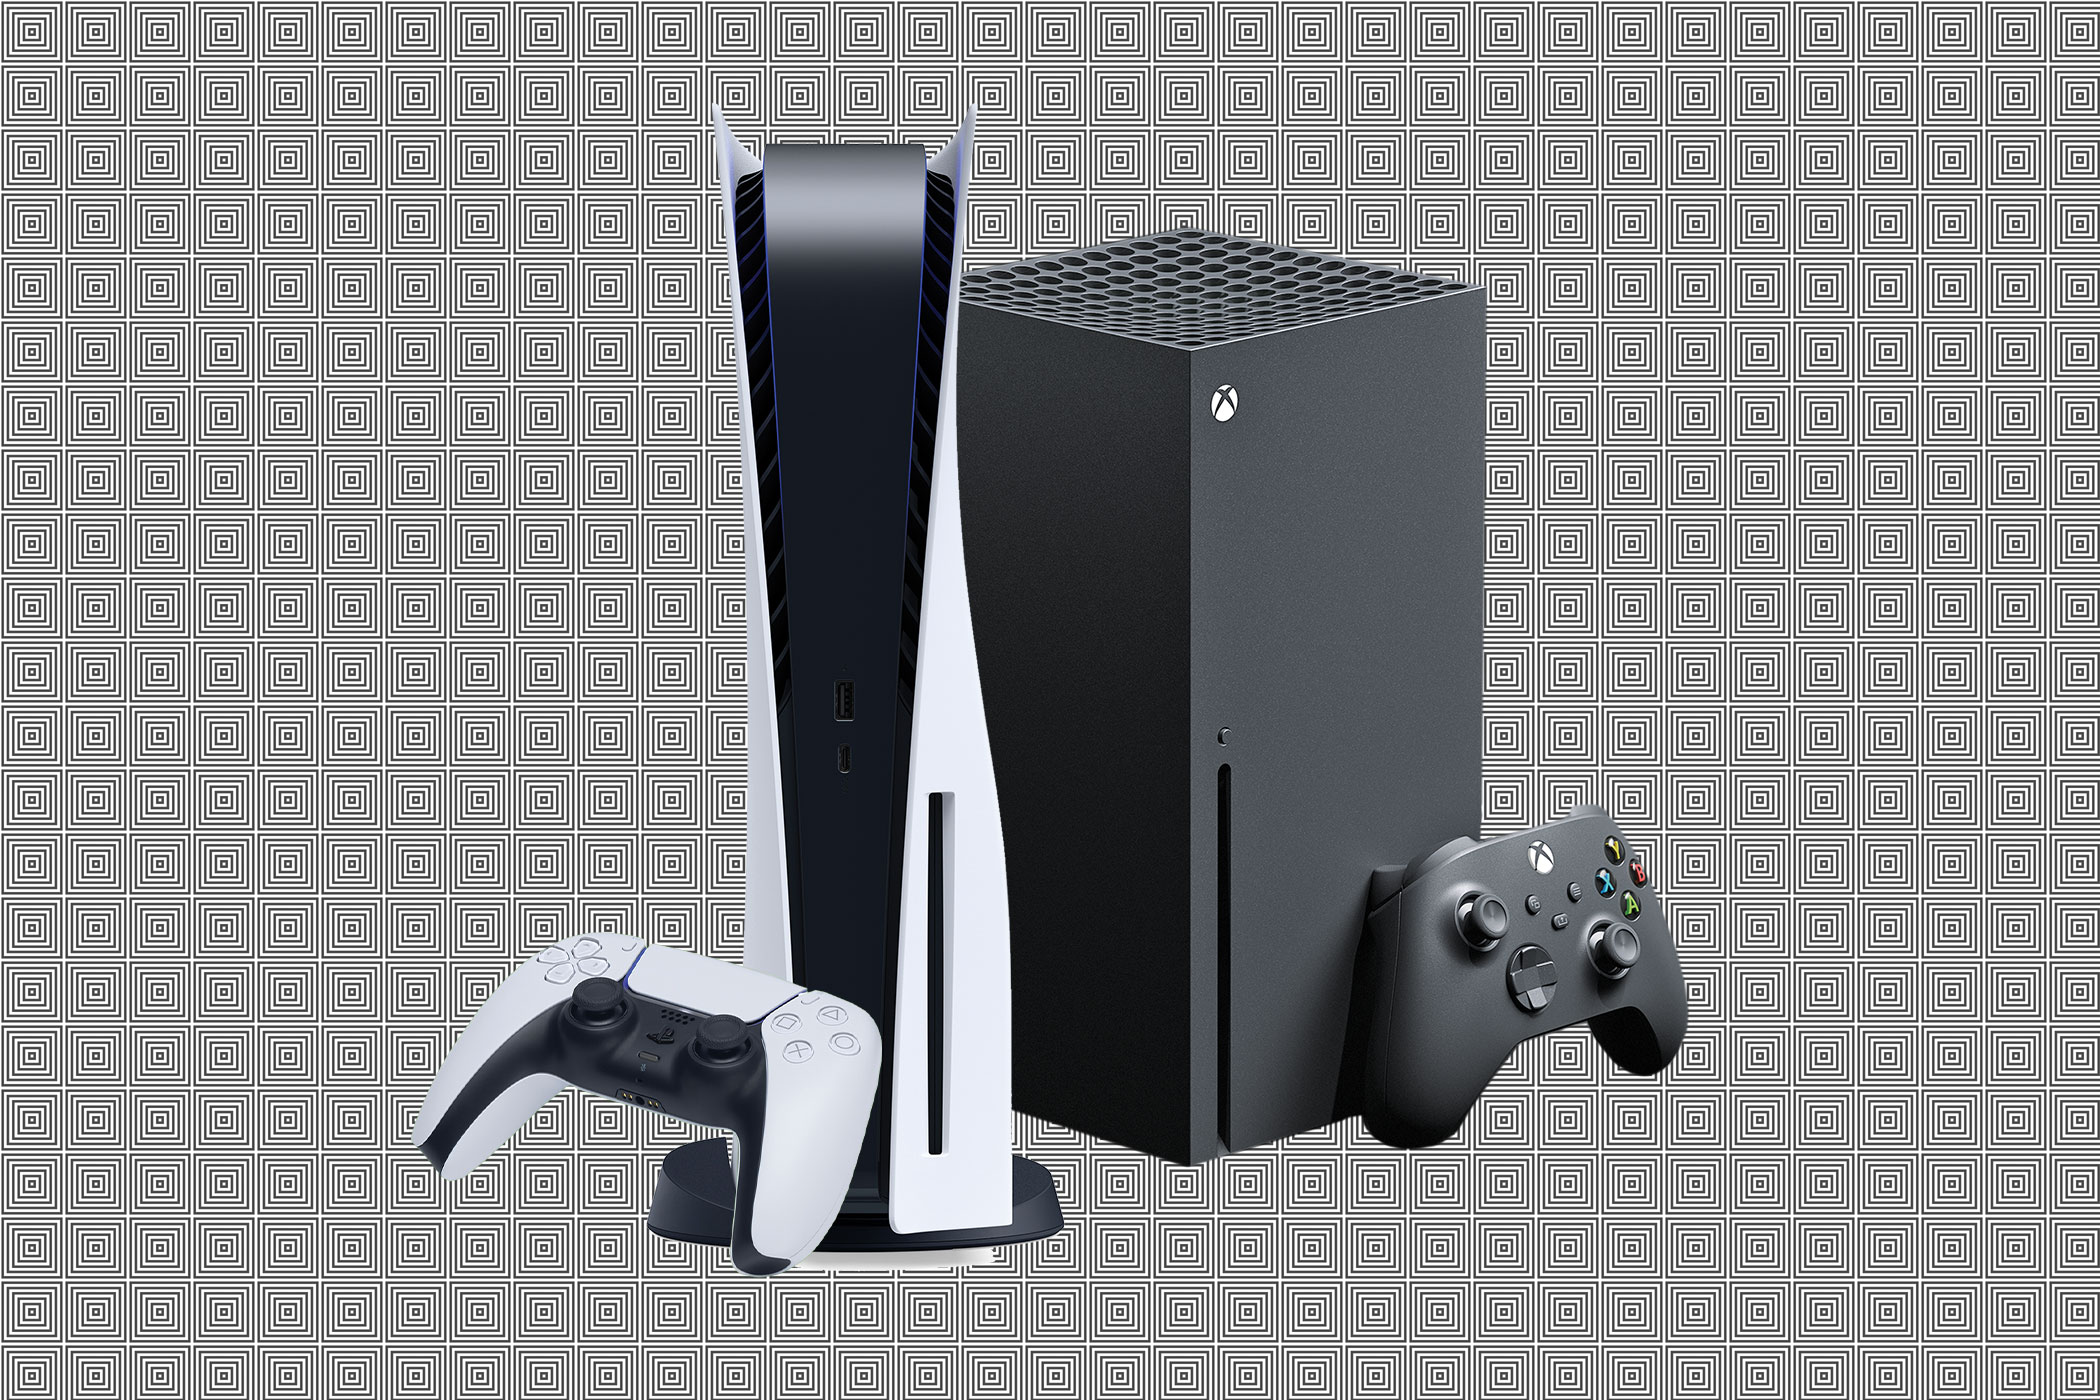 when does new xbox console come out